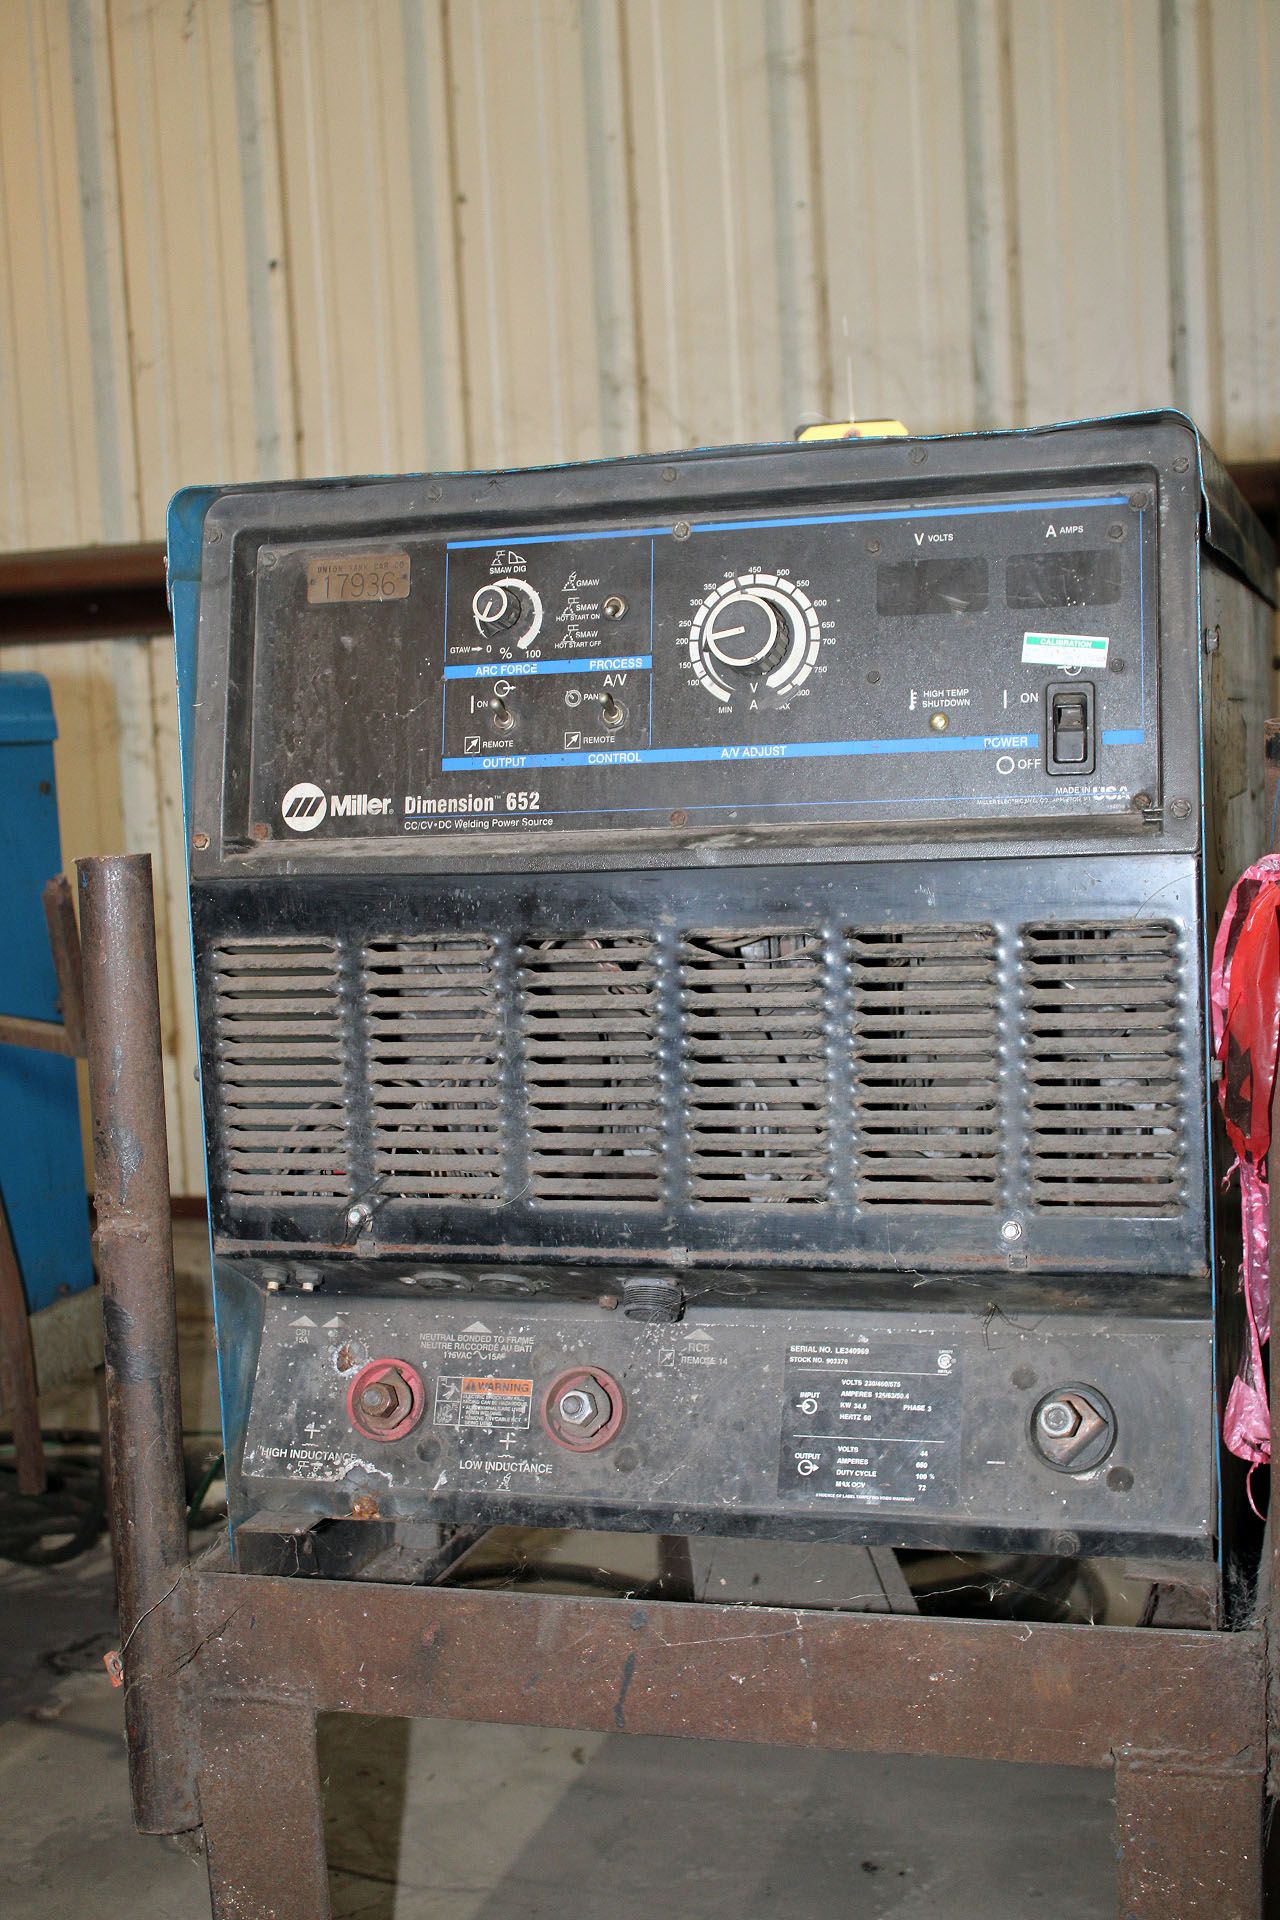 WELDING MACHINE, MILLER MDL. DIMENSION 652 POWER SOURCE, new 2004, S/N LE340969 - Image 2 of 3